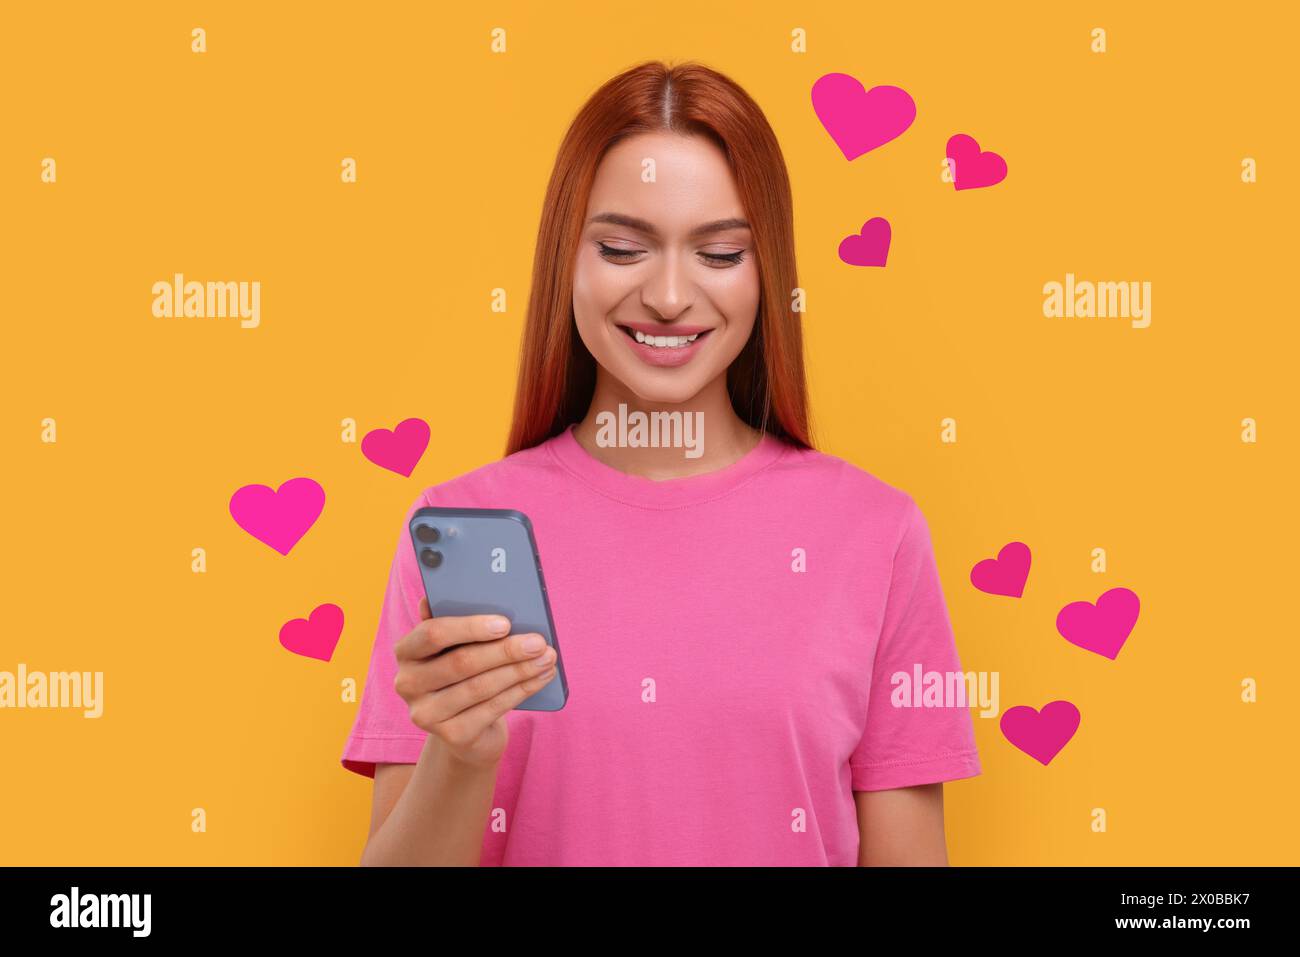 Long distance love. Woman chatting with sweetheart via smartphone on golden background. Hearts flying out of device and swirling around her Stock Photo